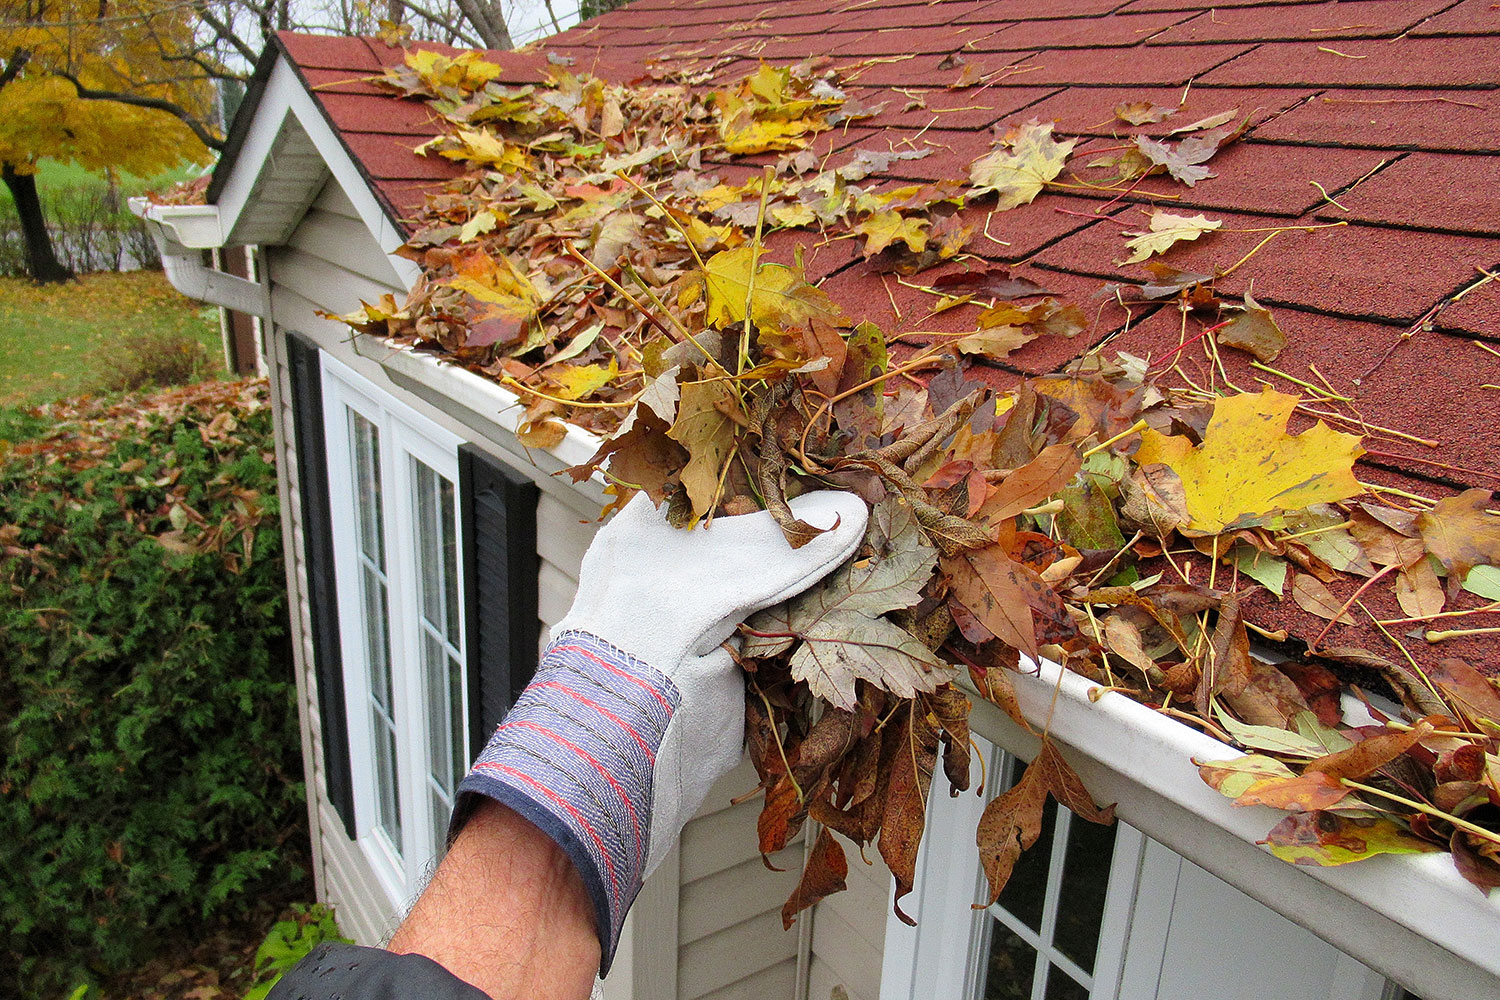 Gutters Must Be Inspected and Cleaned